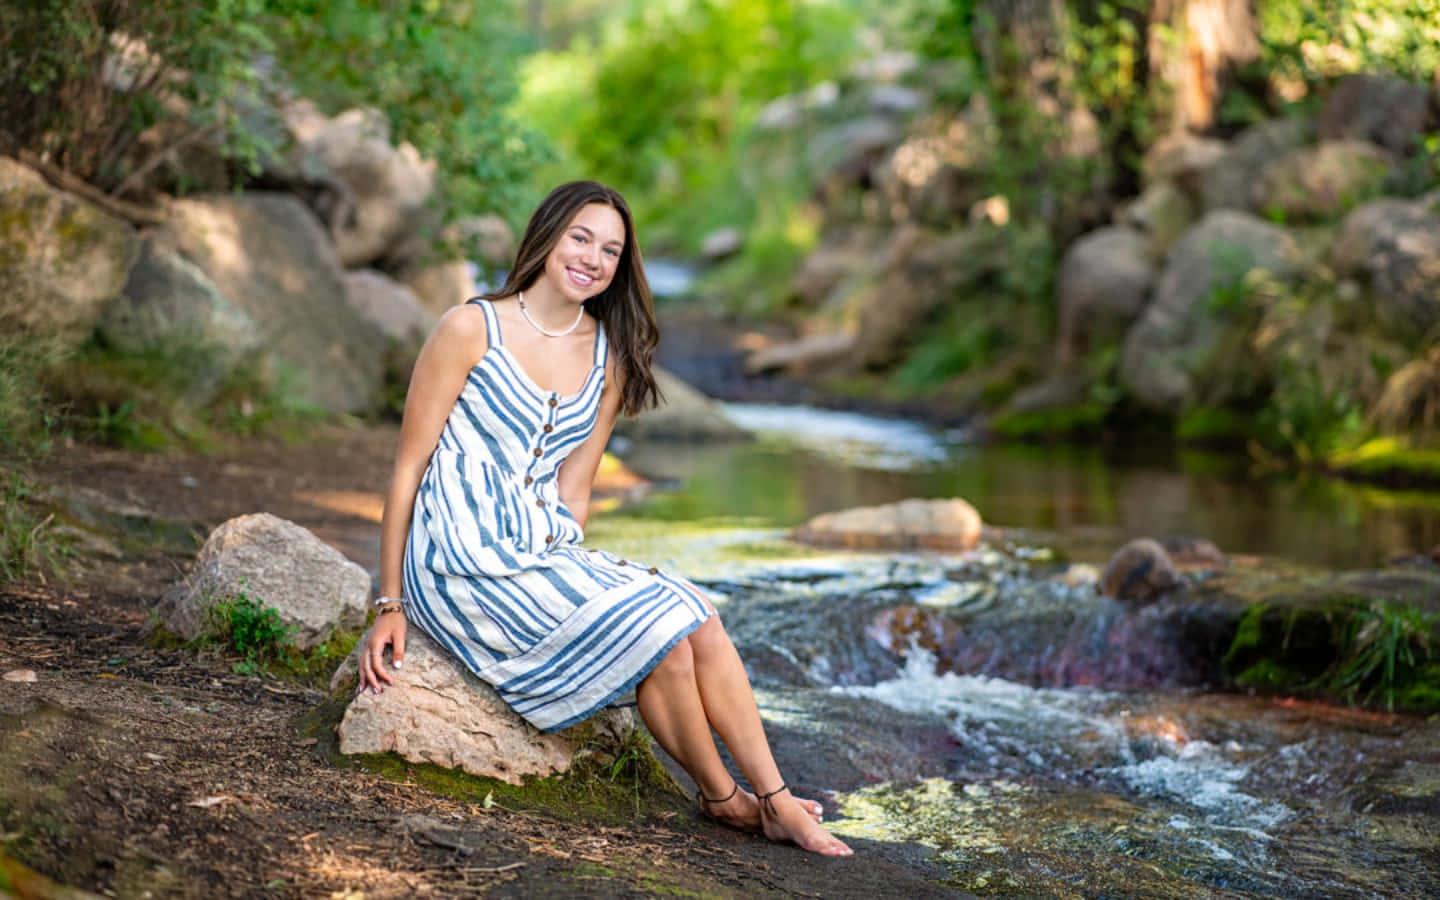 Senior Girl By River In Dress Pictures